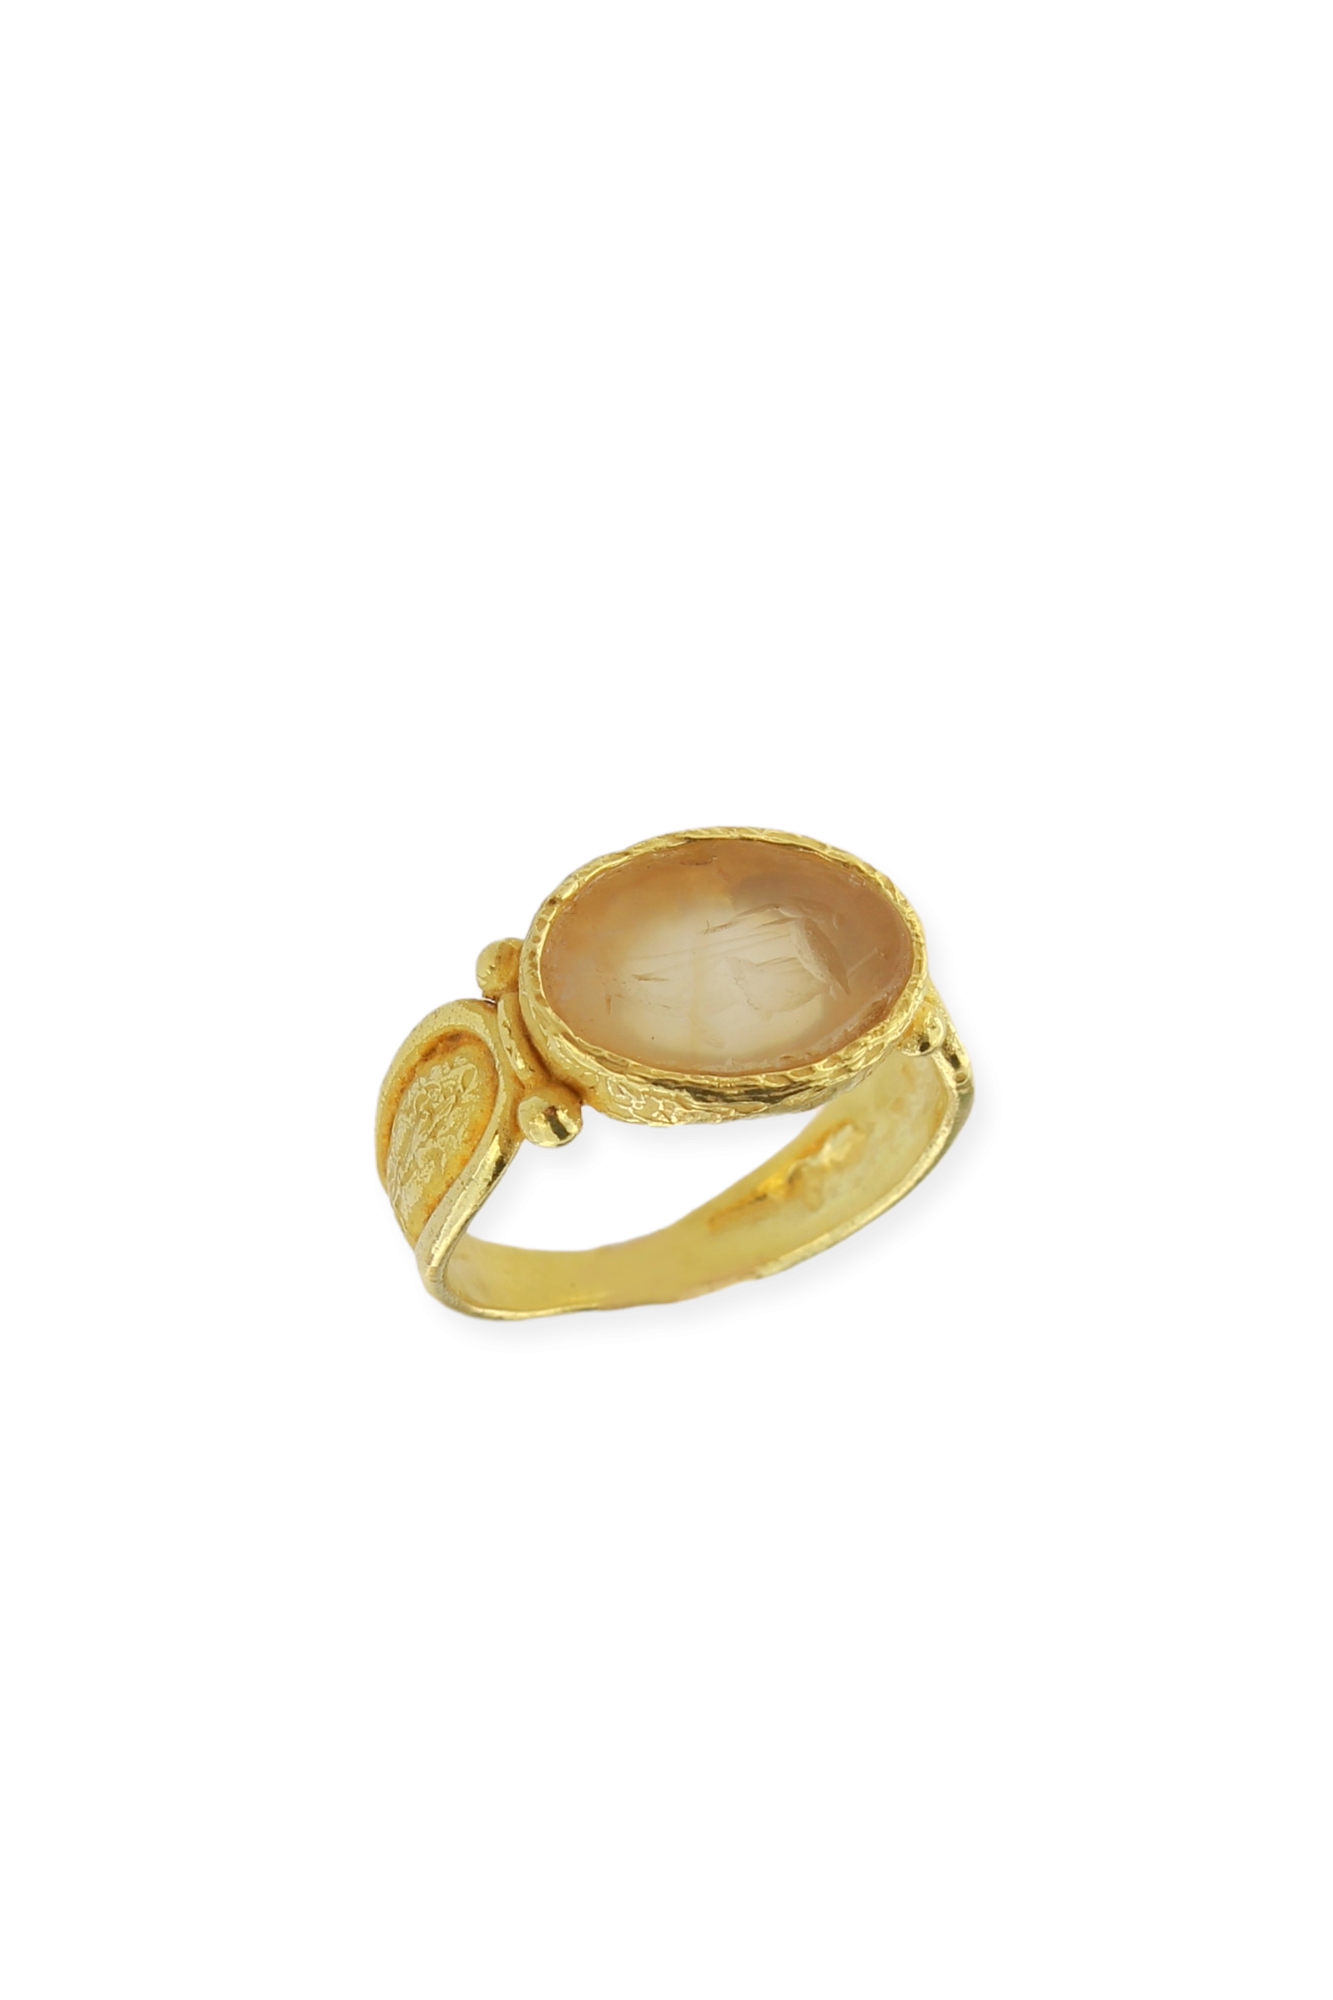 SE167A-18-Kt-Yellow-Gold-Signet-Ring-with-Engraved-Carnelian-1